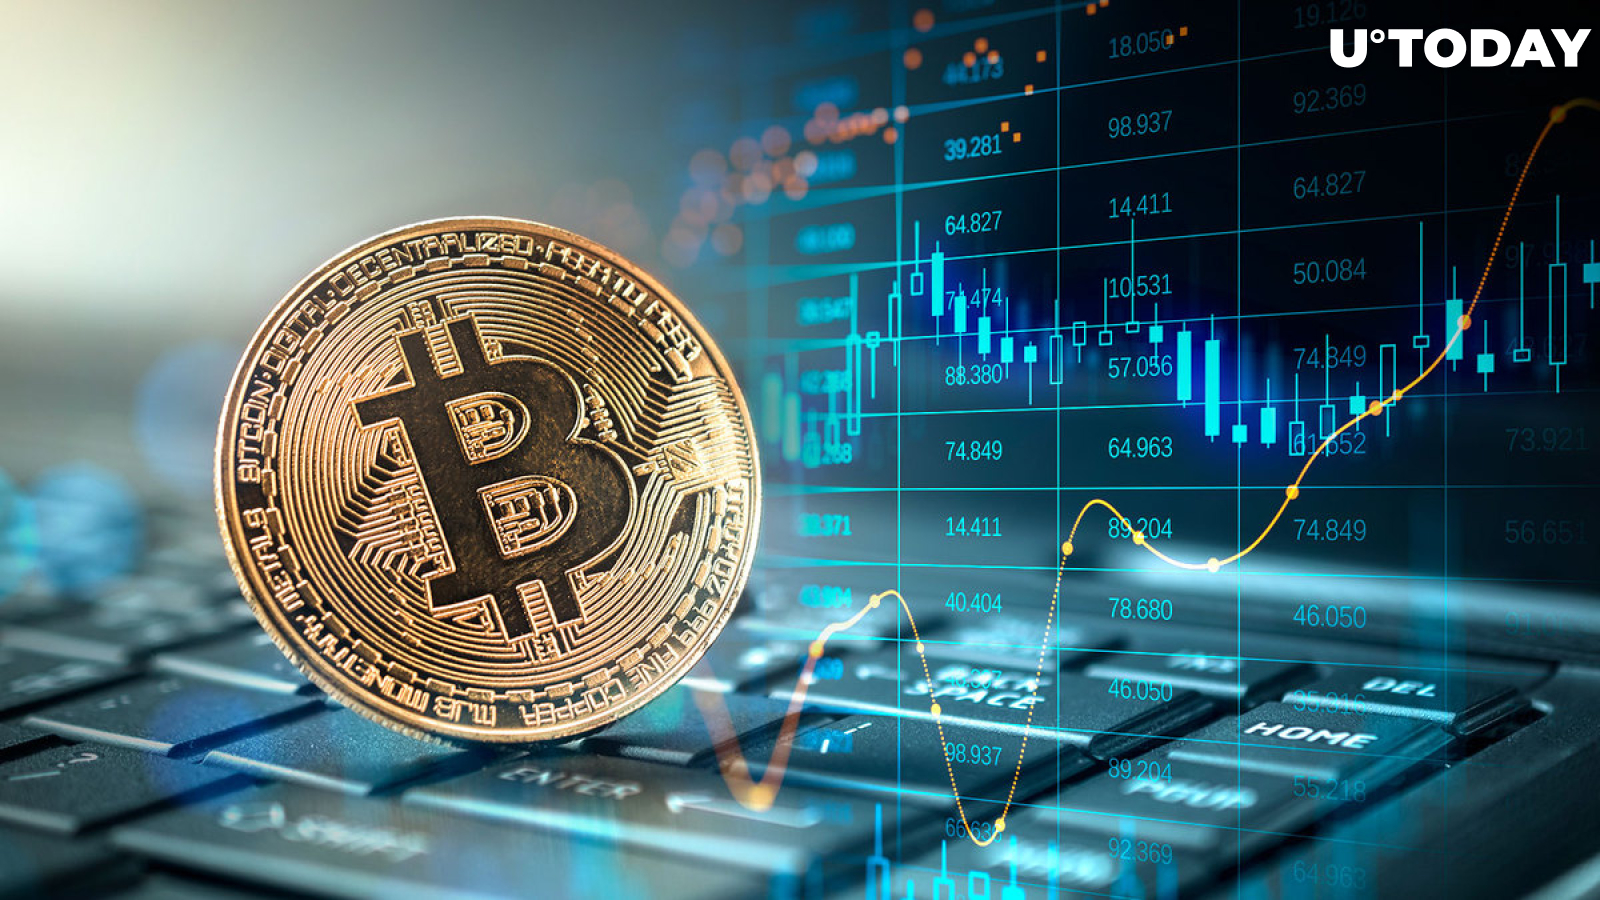 Bitcoin Crosses Crucial Psychological Benchmark, Here's What's Next: Analyst